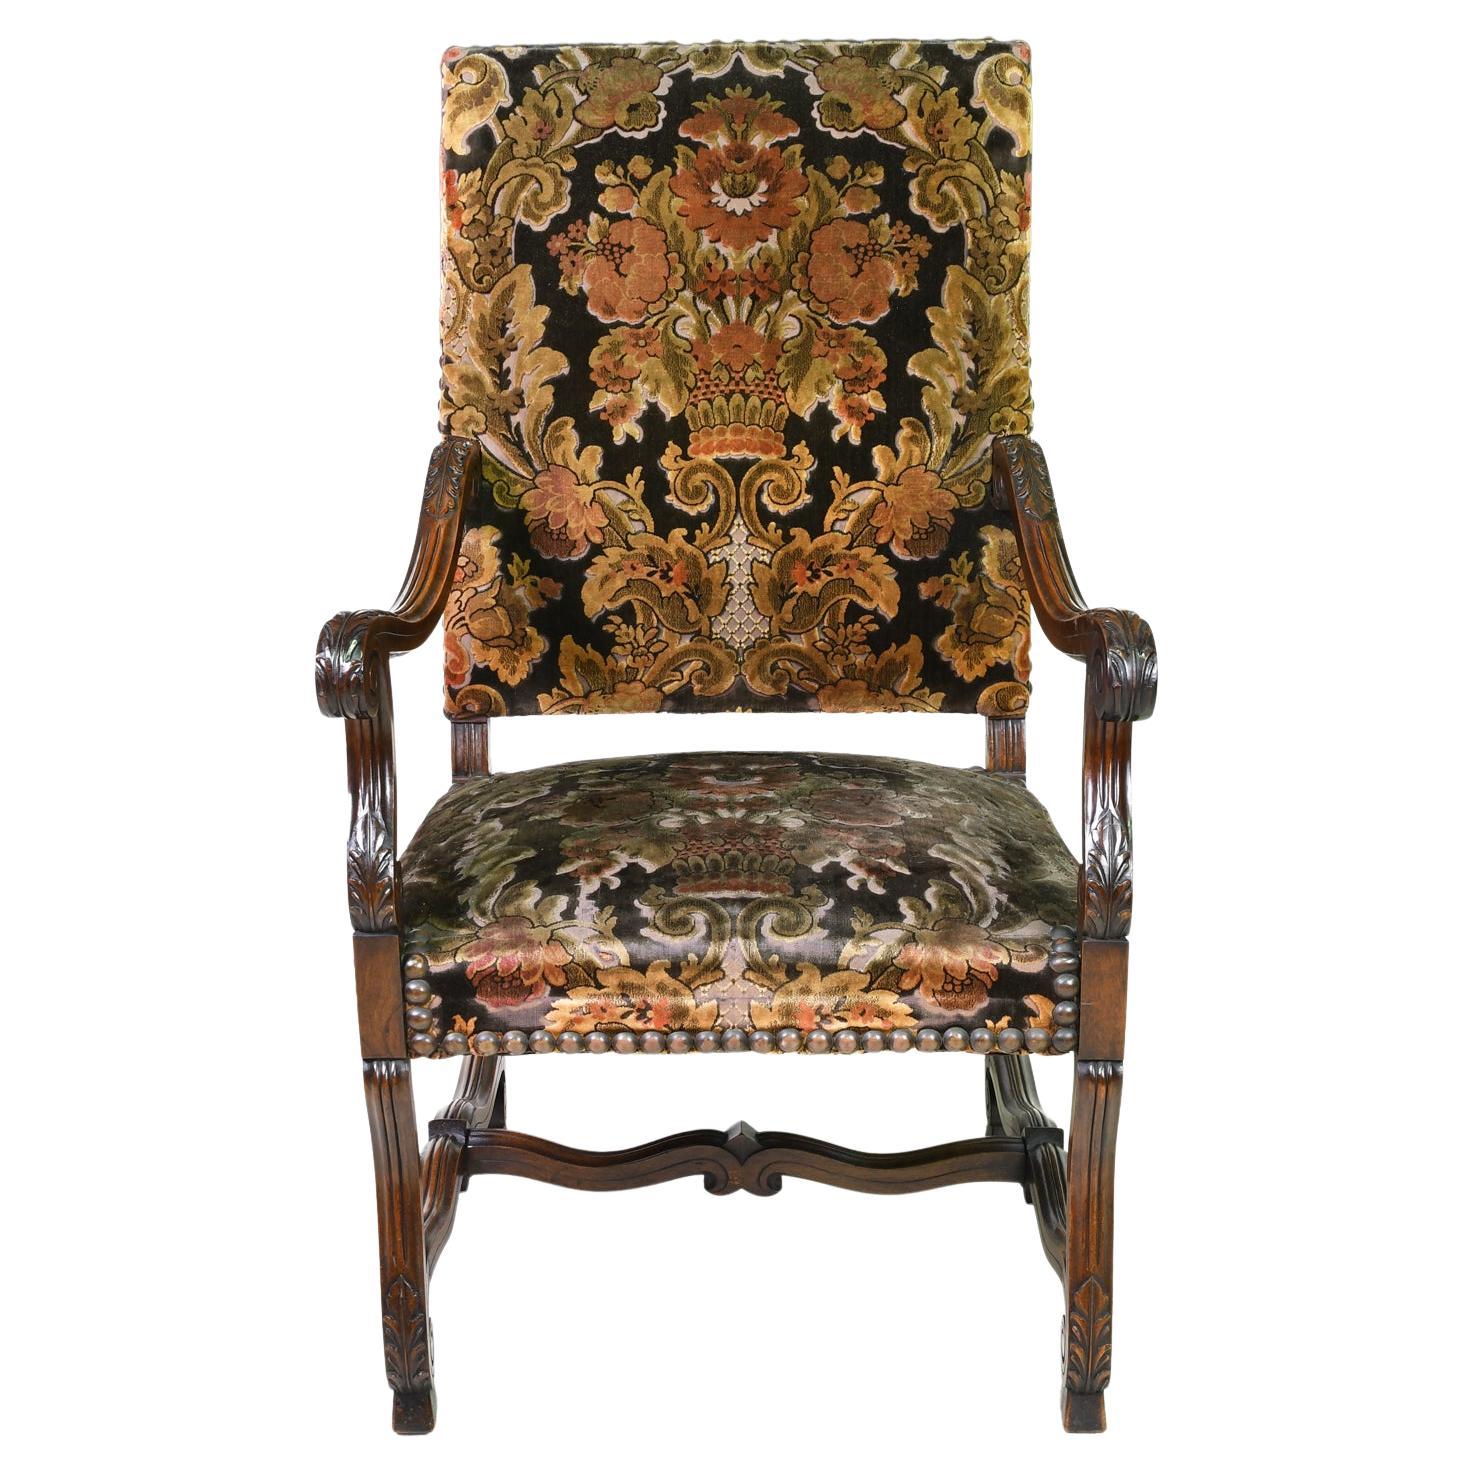 A pair of French provincial, Louis XIV-style fauteuils à la reine in walnut with carved acanthus scrolled arms, 